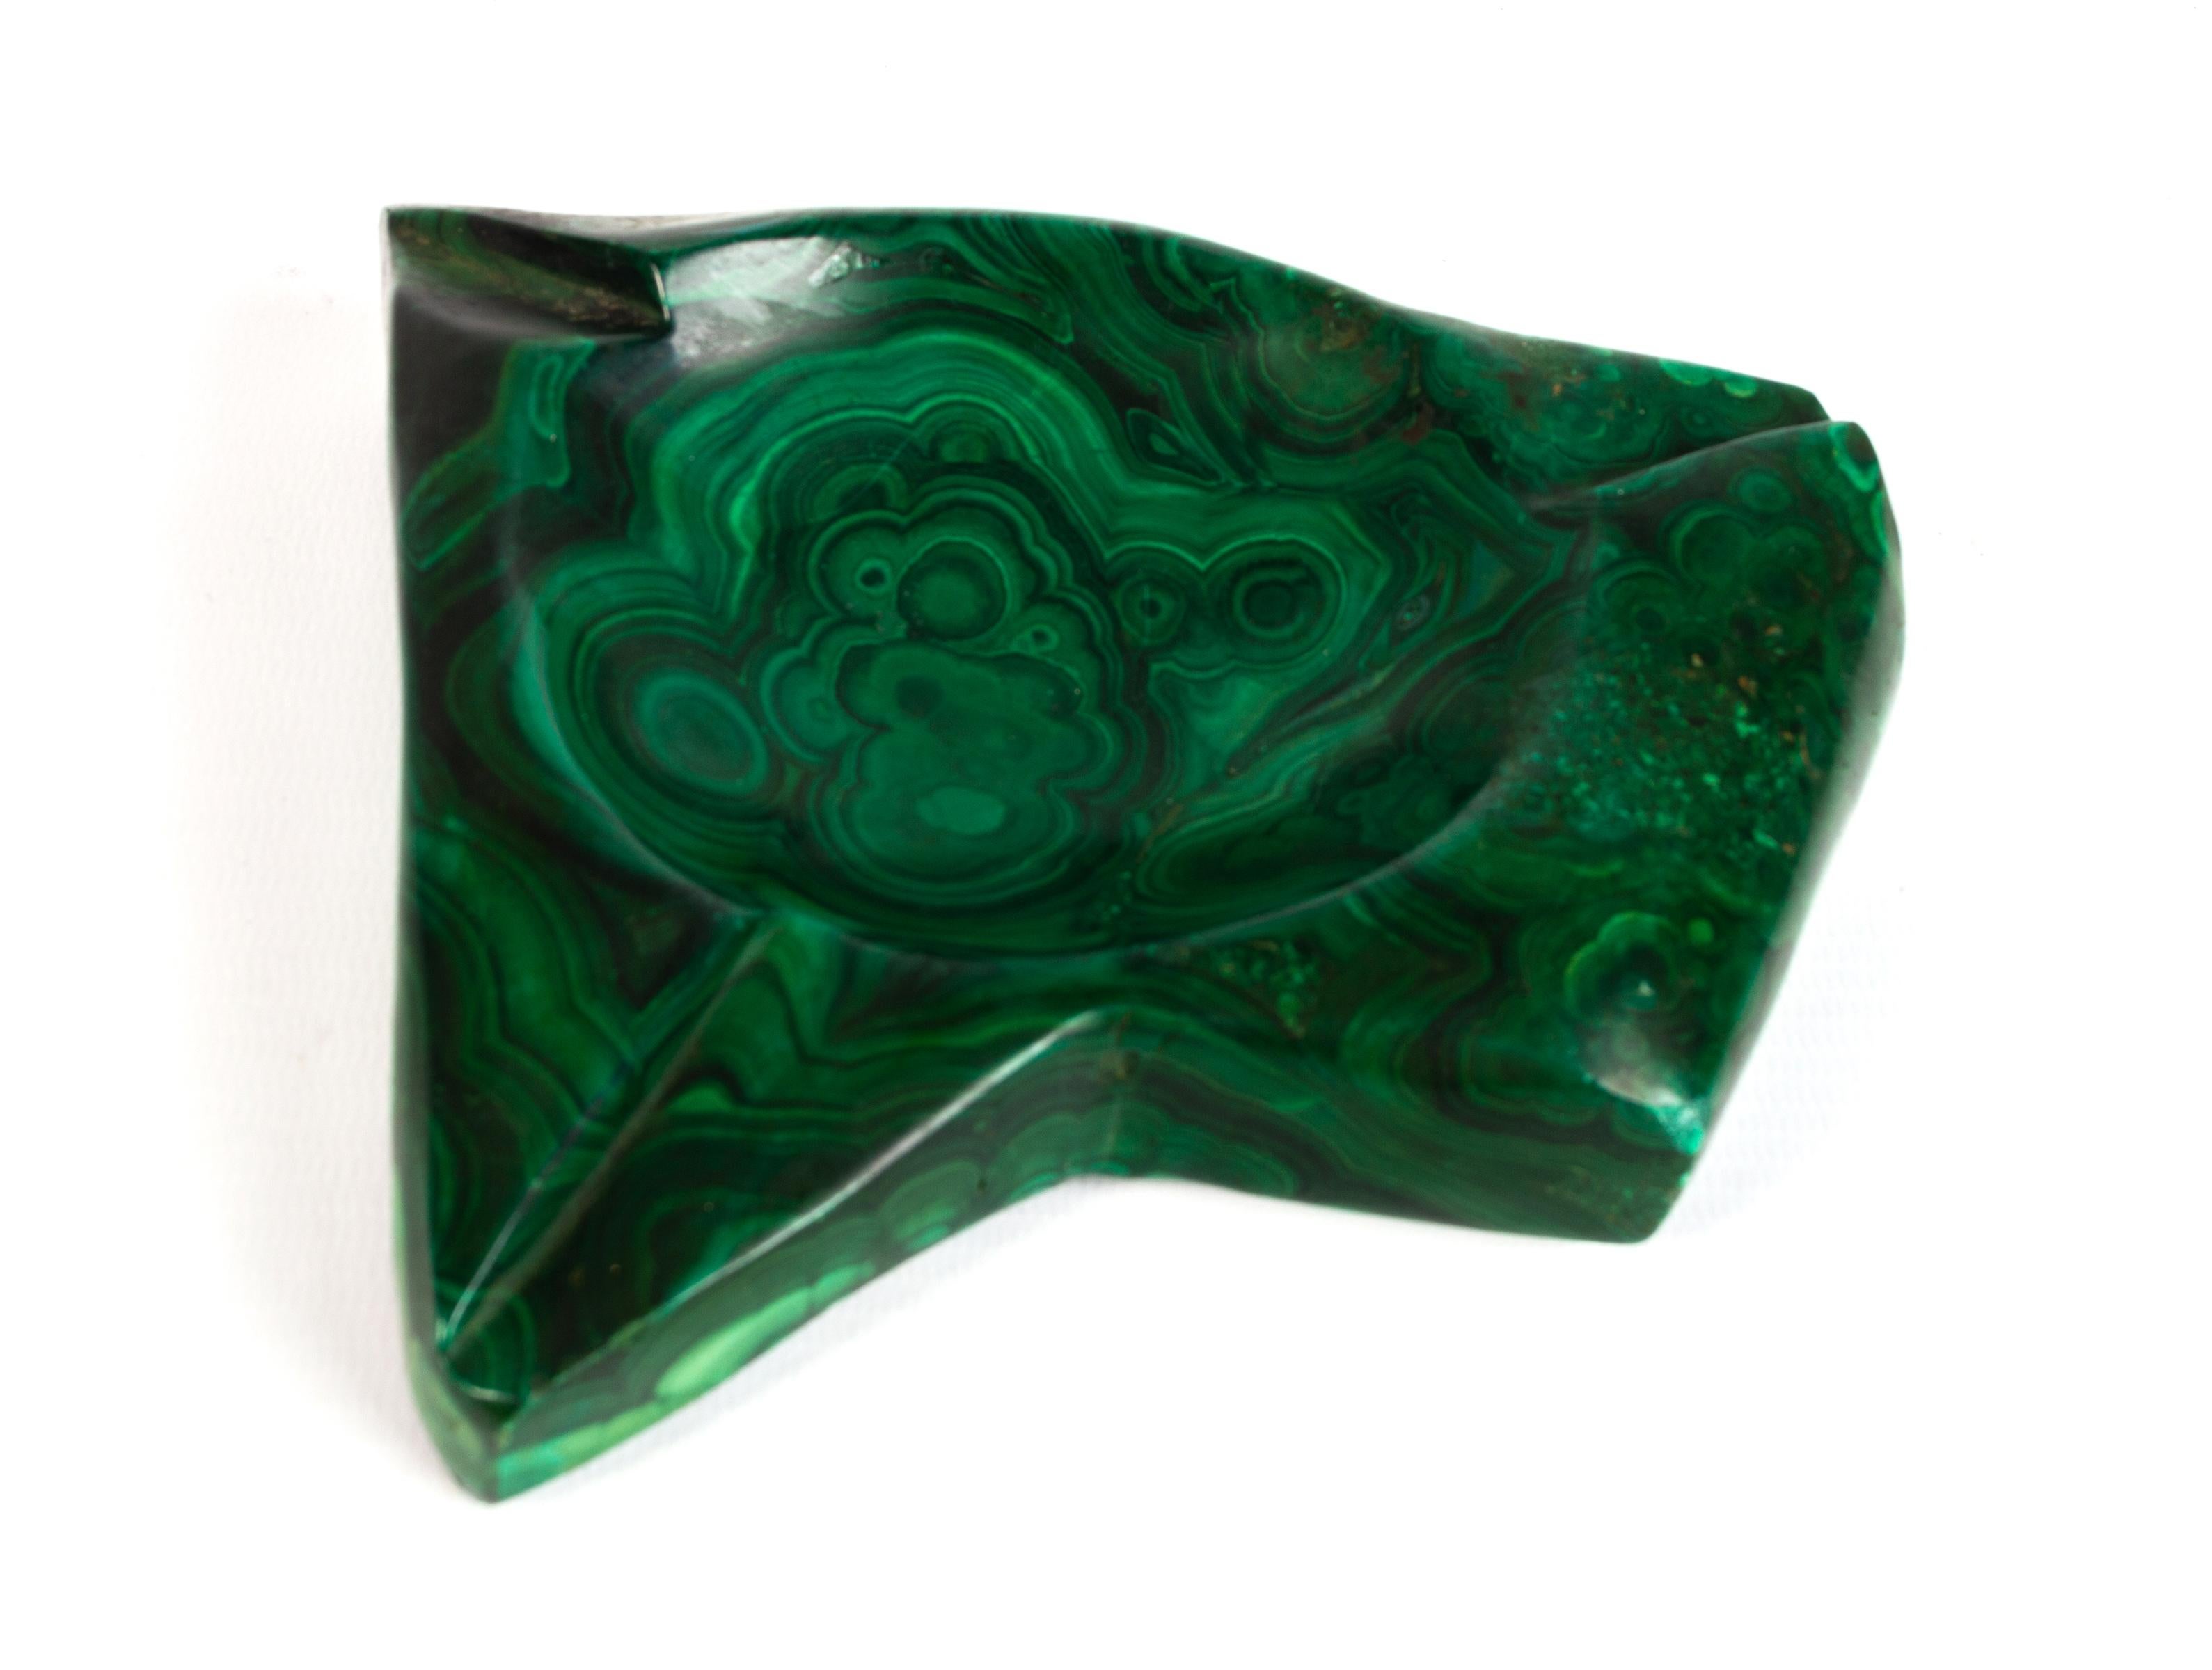 Large Vintage Malachite Natural Stone Vide Poche Trinket Dish Italy, C.1960 In Good Condition For Sale In London, GB